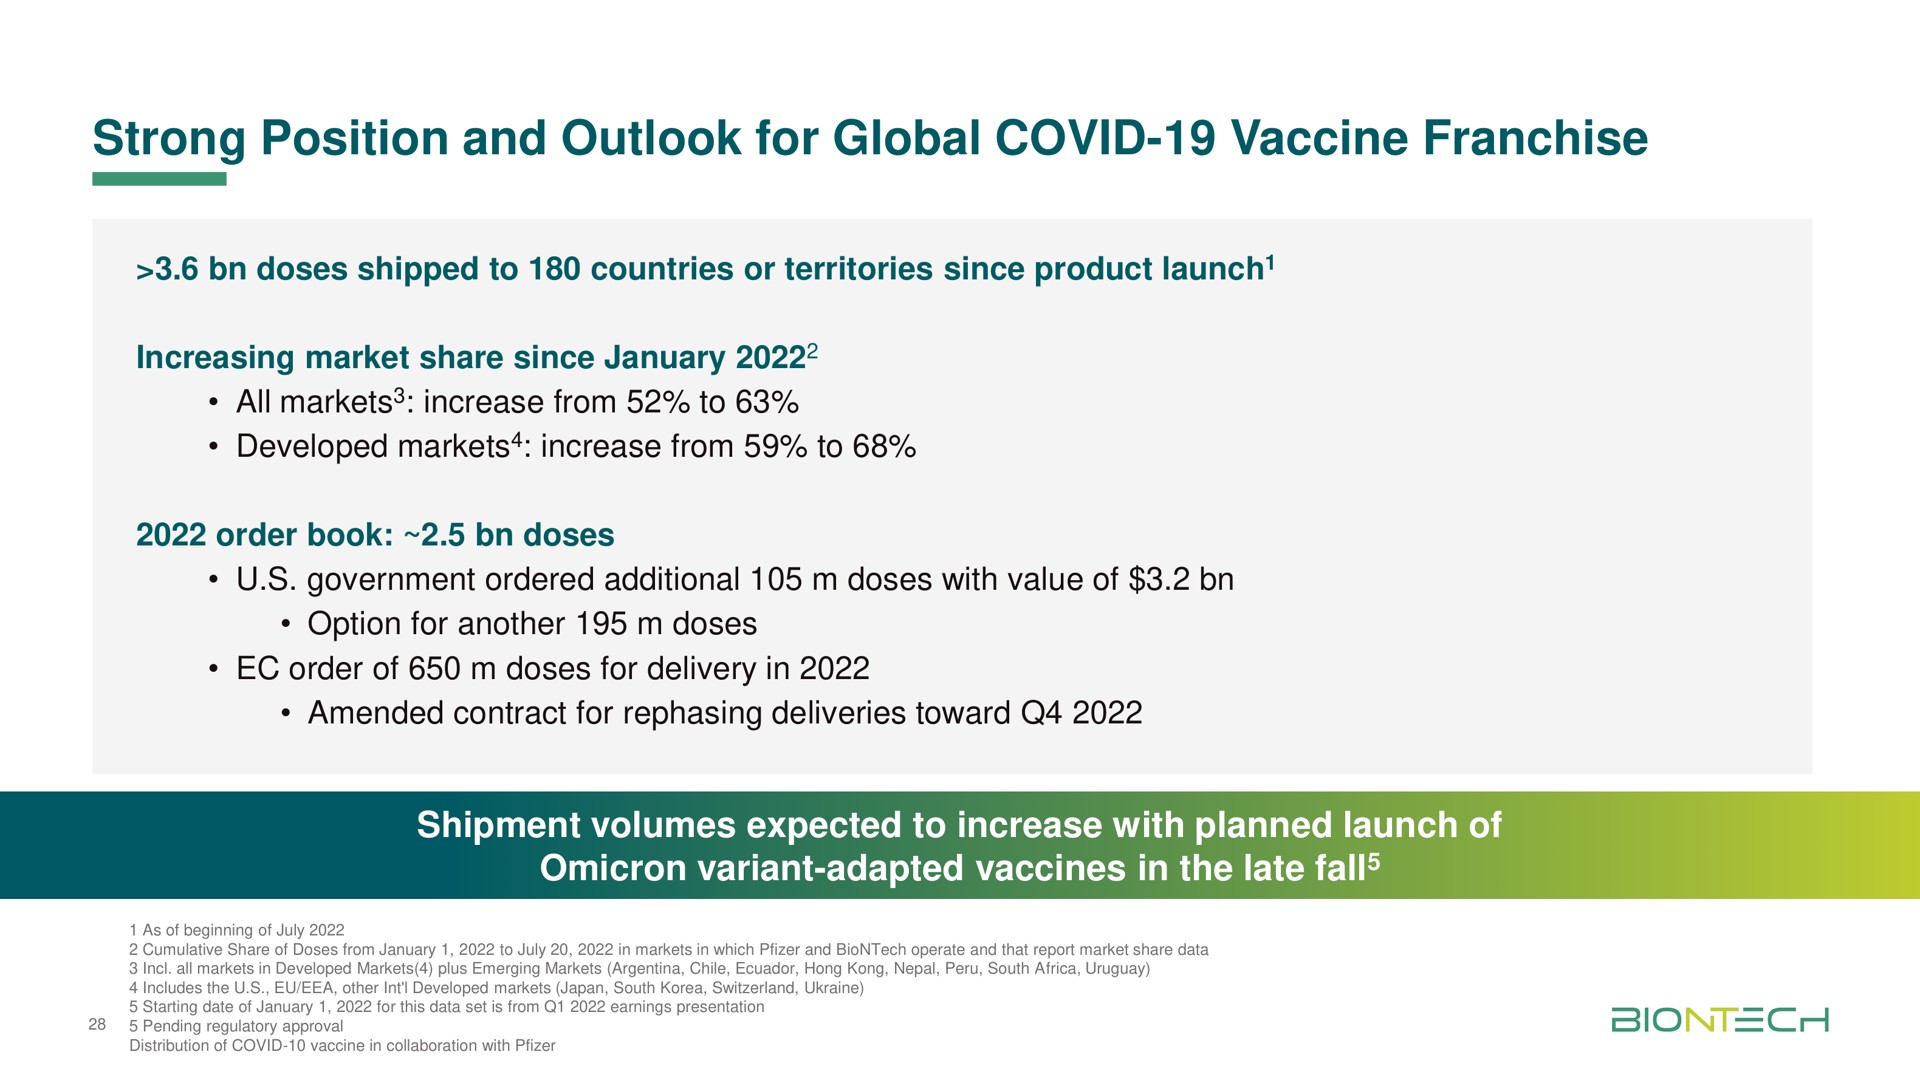 strong position and outlook for global covid vaccine franchise | BioNTech